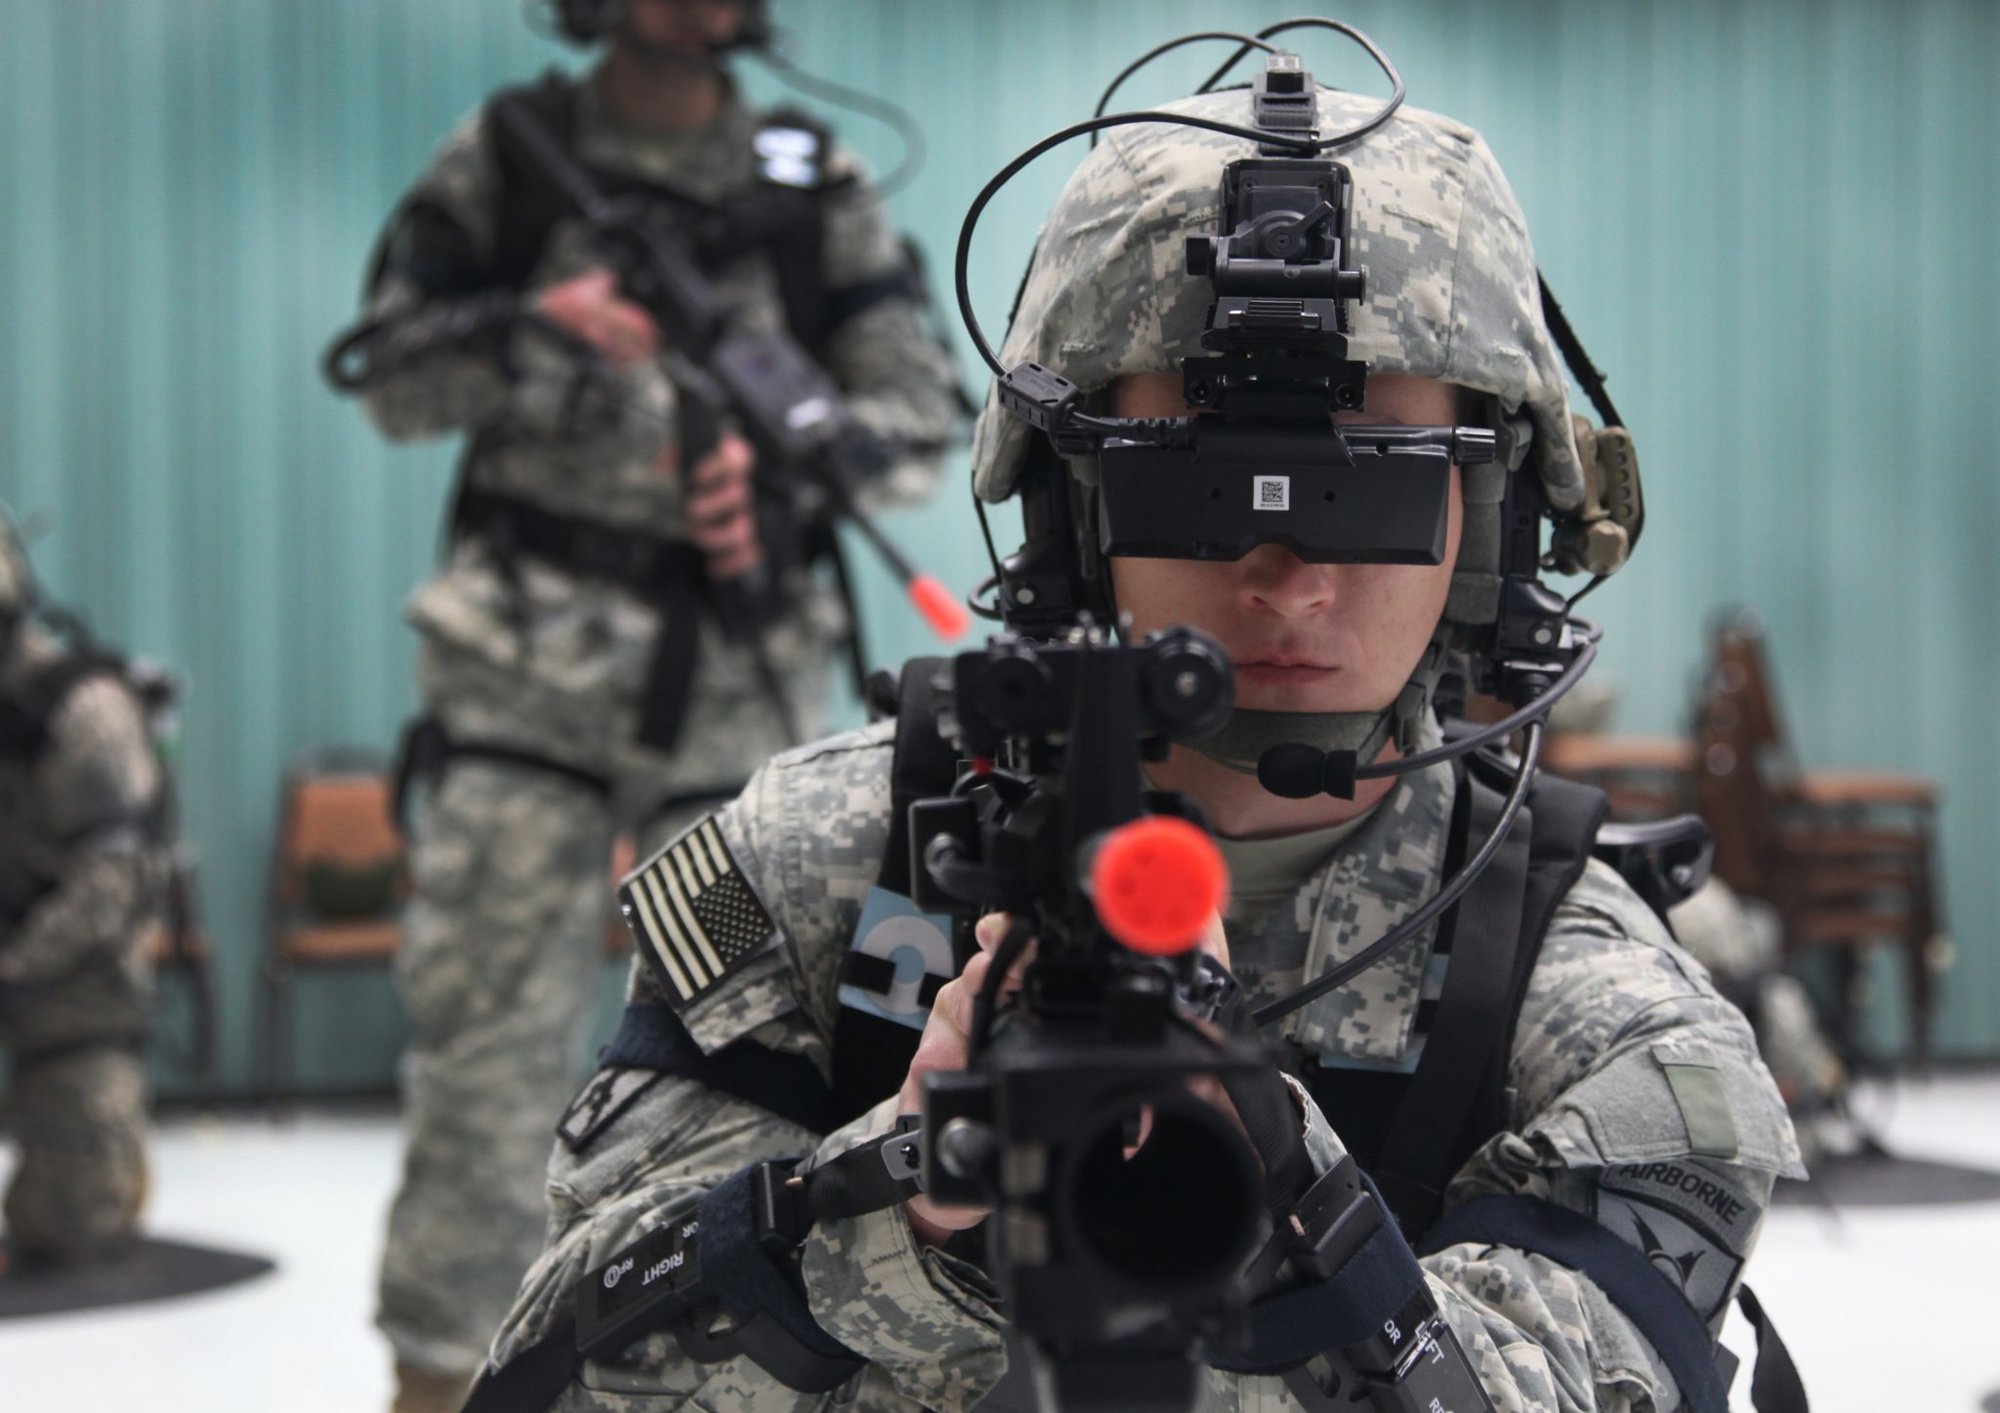 A group of U.S. Army Soldiers assigned to 4th Joint Communication Support Element (Airborne)/ 4 Joint Communication Support, are operating the Dismounted Soldier Training System at Mission Command Training Branch Building, Fort Stewart, Ga., April 17, 2013. This training is helping Soldiers operate using a virtual environment as if they were on a real life mission on a foreign battlefield. (U.S. Army photo by Sgt. Austin Berner/Not Released)